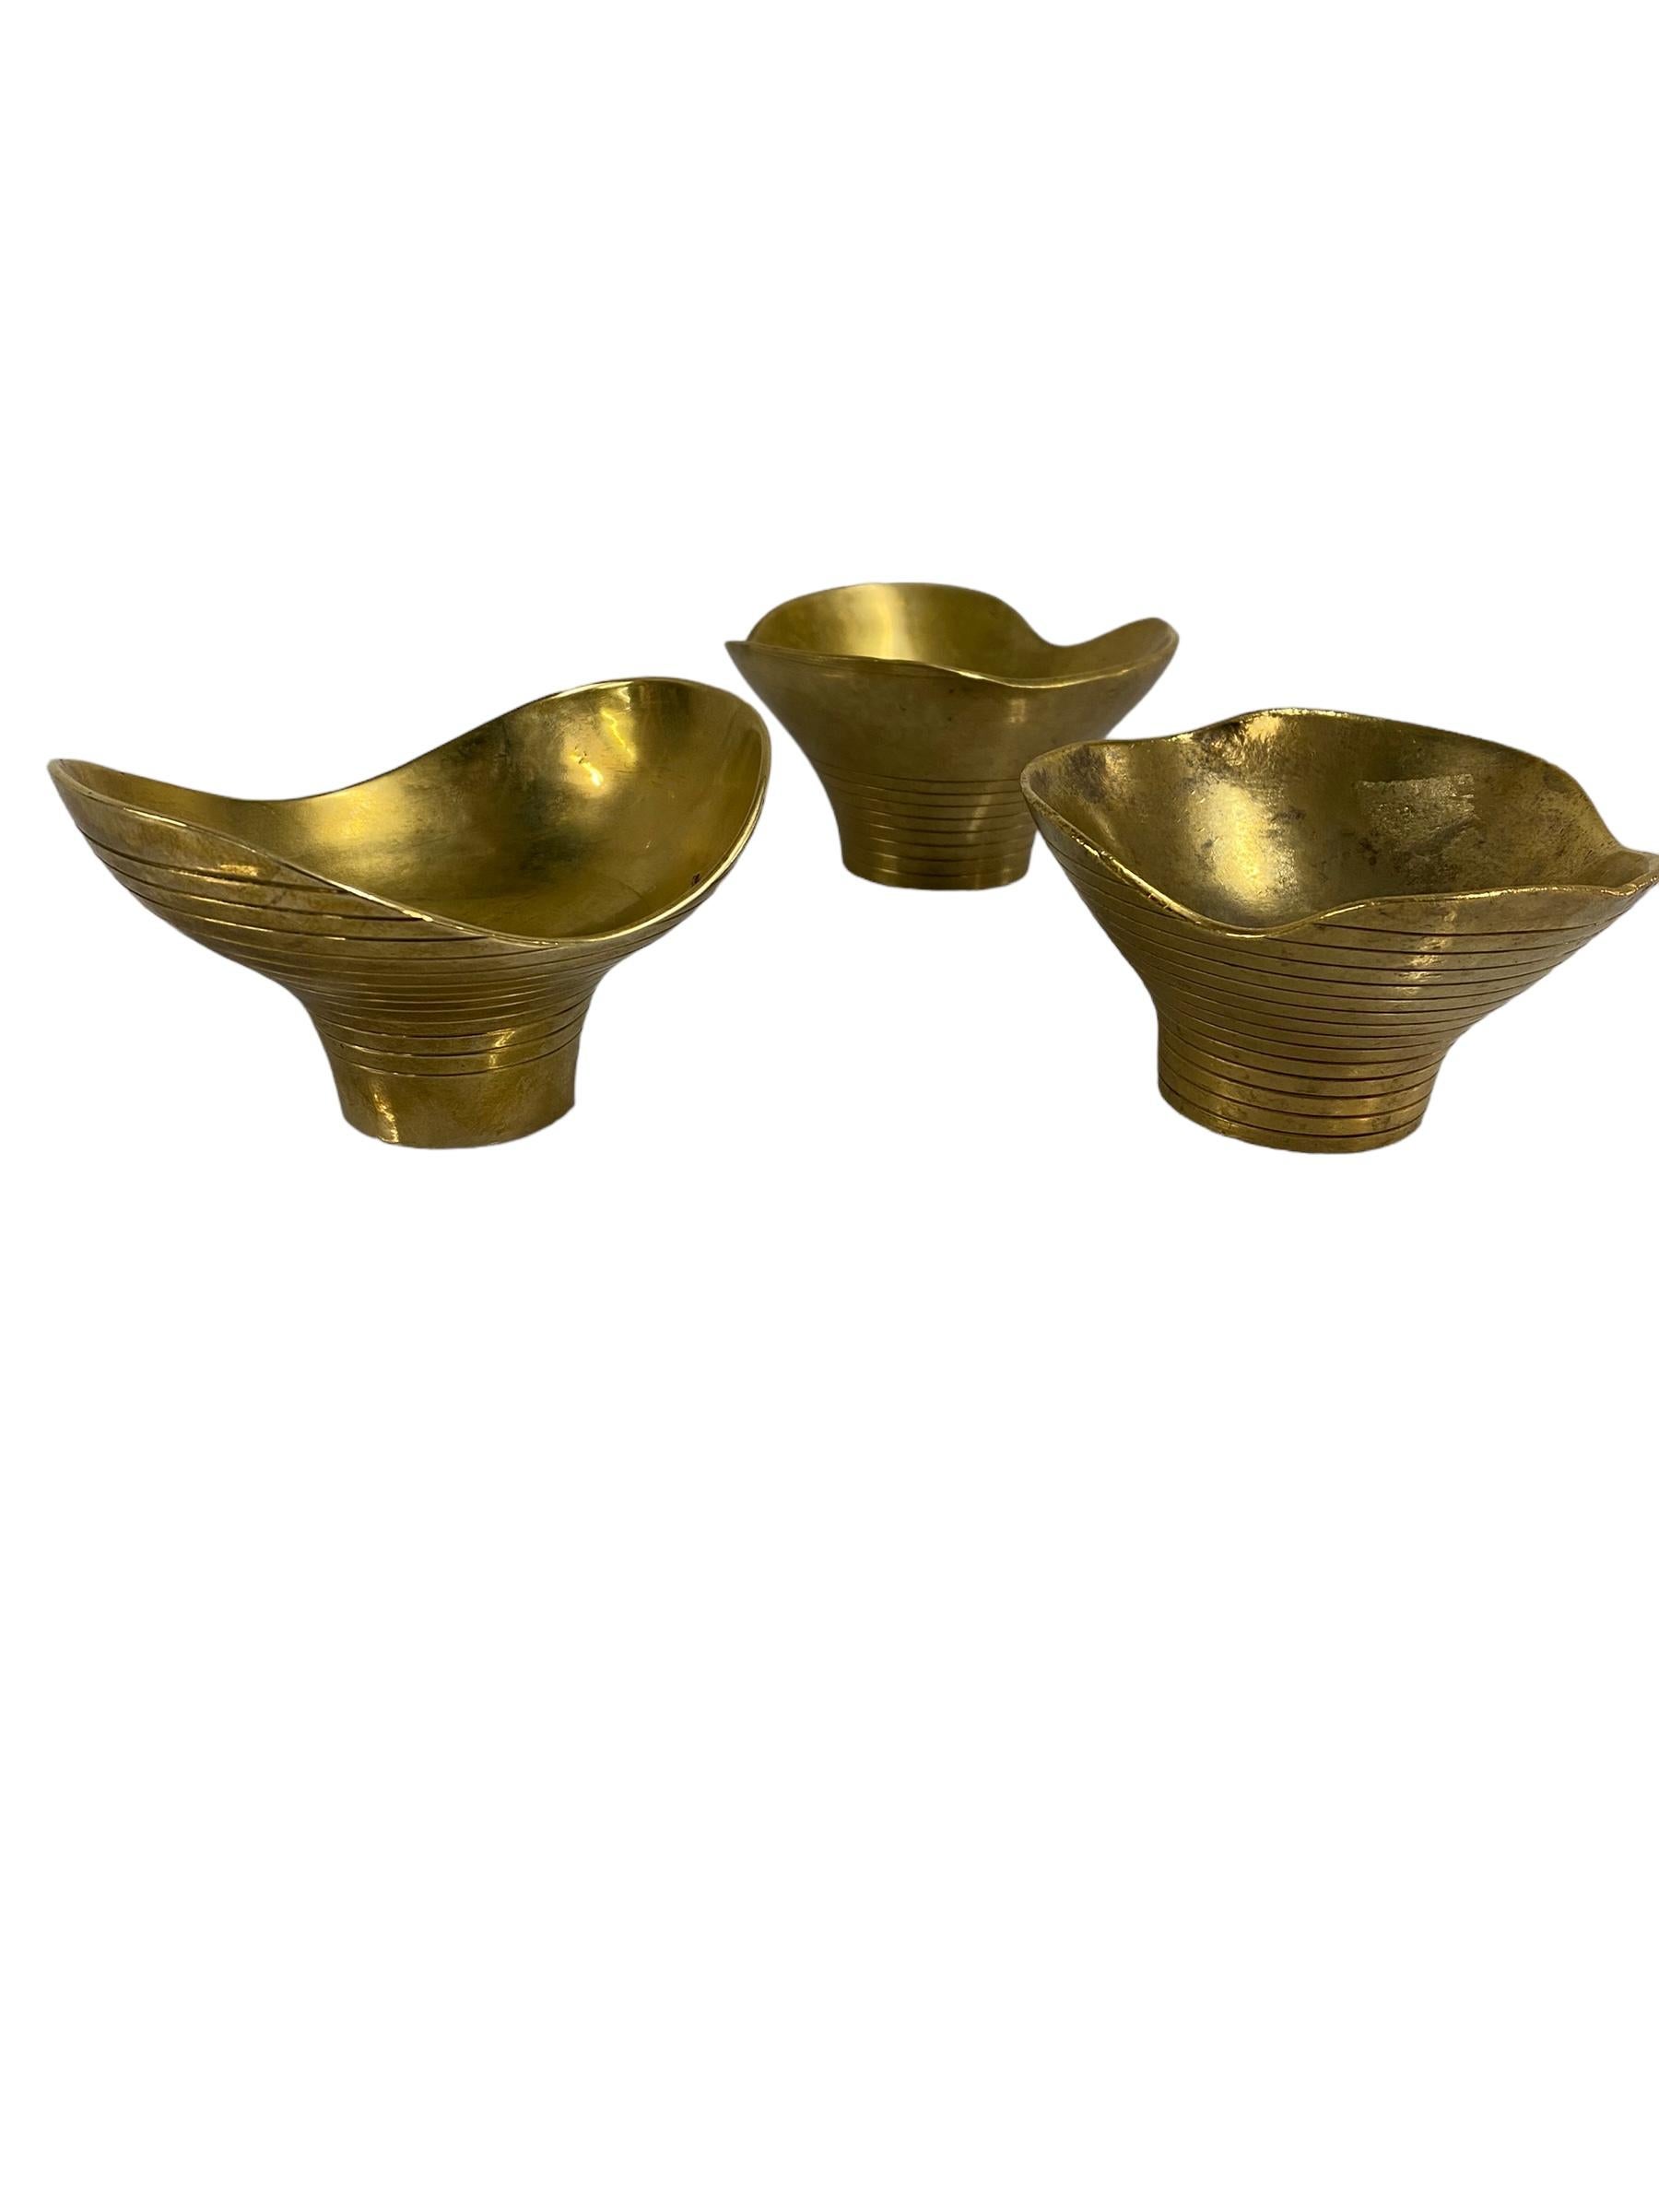 A set of 3 solid brass decorative bowls/objects, designed together by Paavo and Helena Tynell, and manufactured by Taito Oy in Finland in the 1940s. Before Paavo Tynell was known as the man who `illuminated Finland´, and early in his career he used